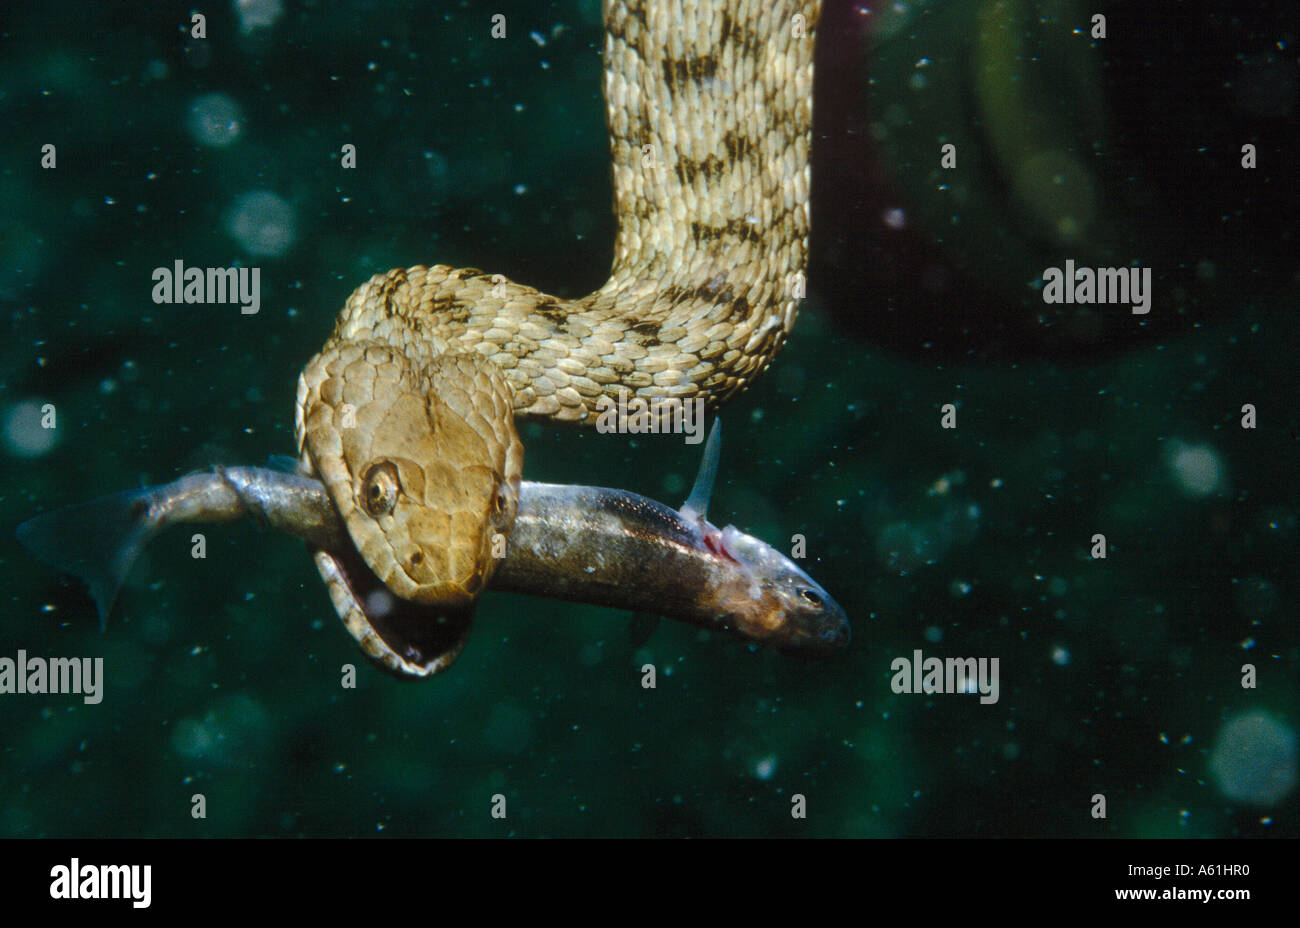 Close-up of Dice snake (Natrix tessellata) with prey underwater Stock Photo